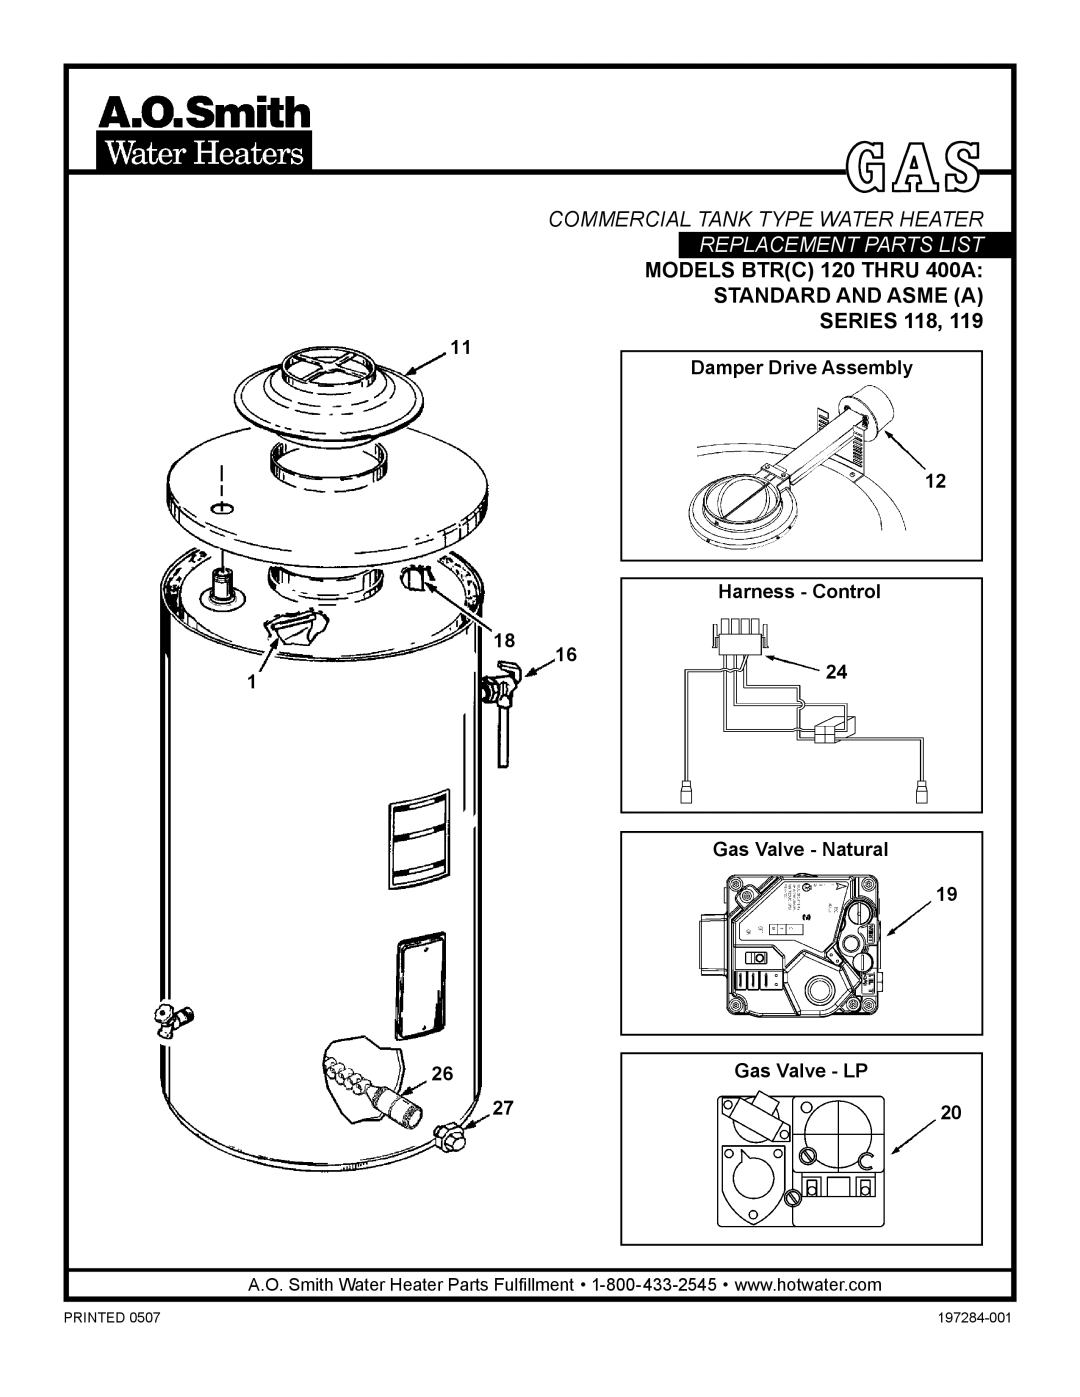 A.O. Smith BTR(C) 120 Thru 400A Standard manual Damper Drive Assembly, Commercial Tank Type Water Heater, SERIES 118 